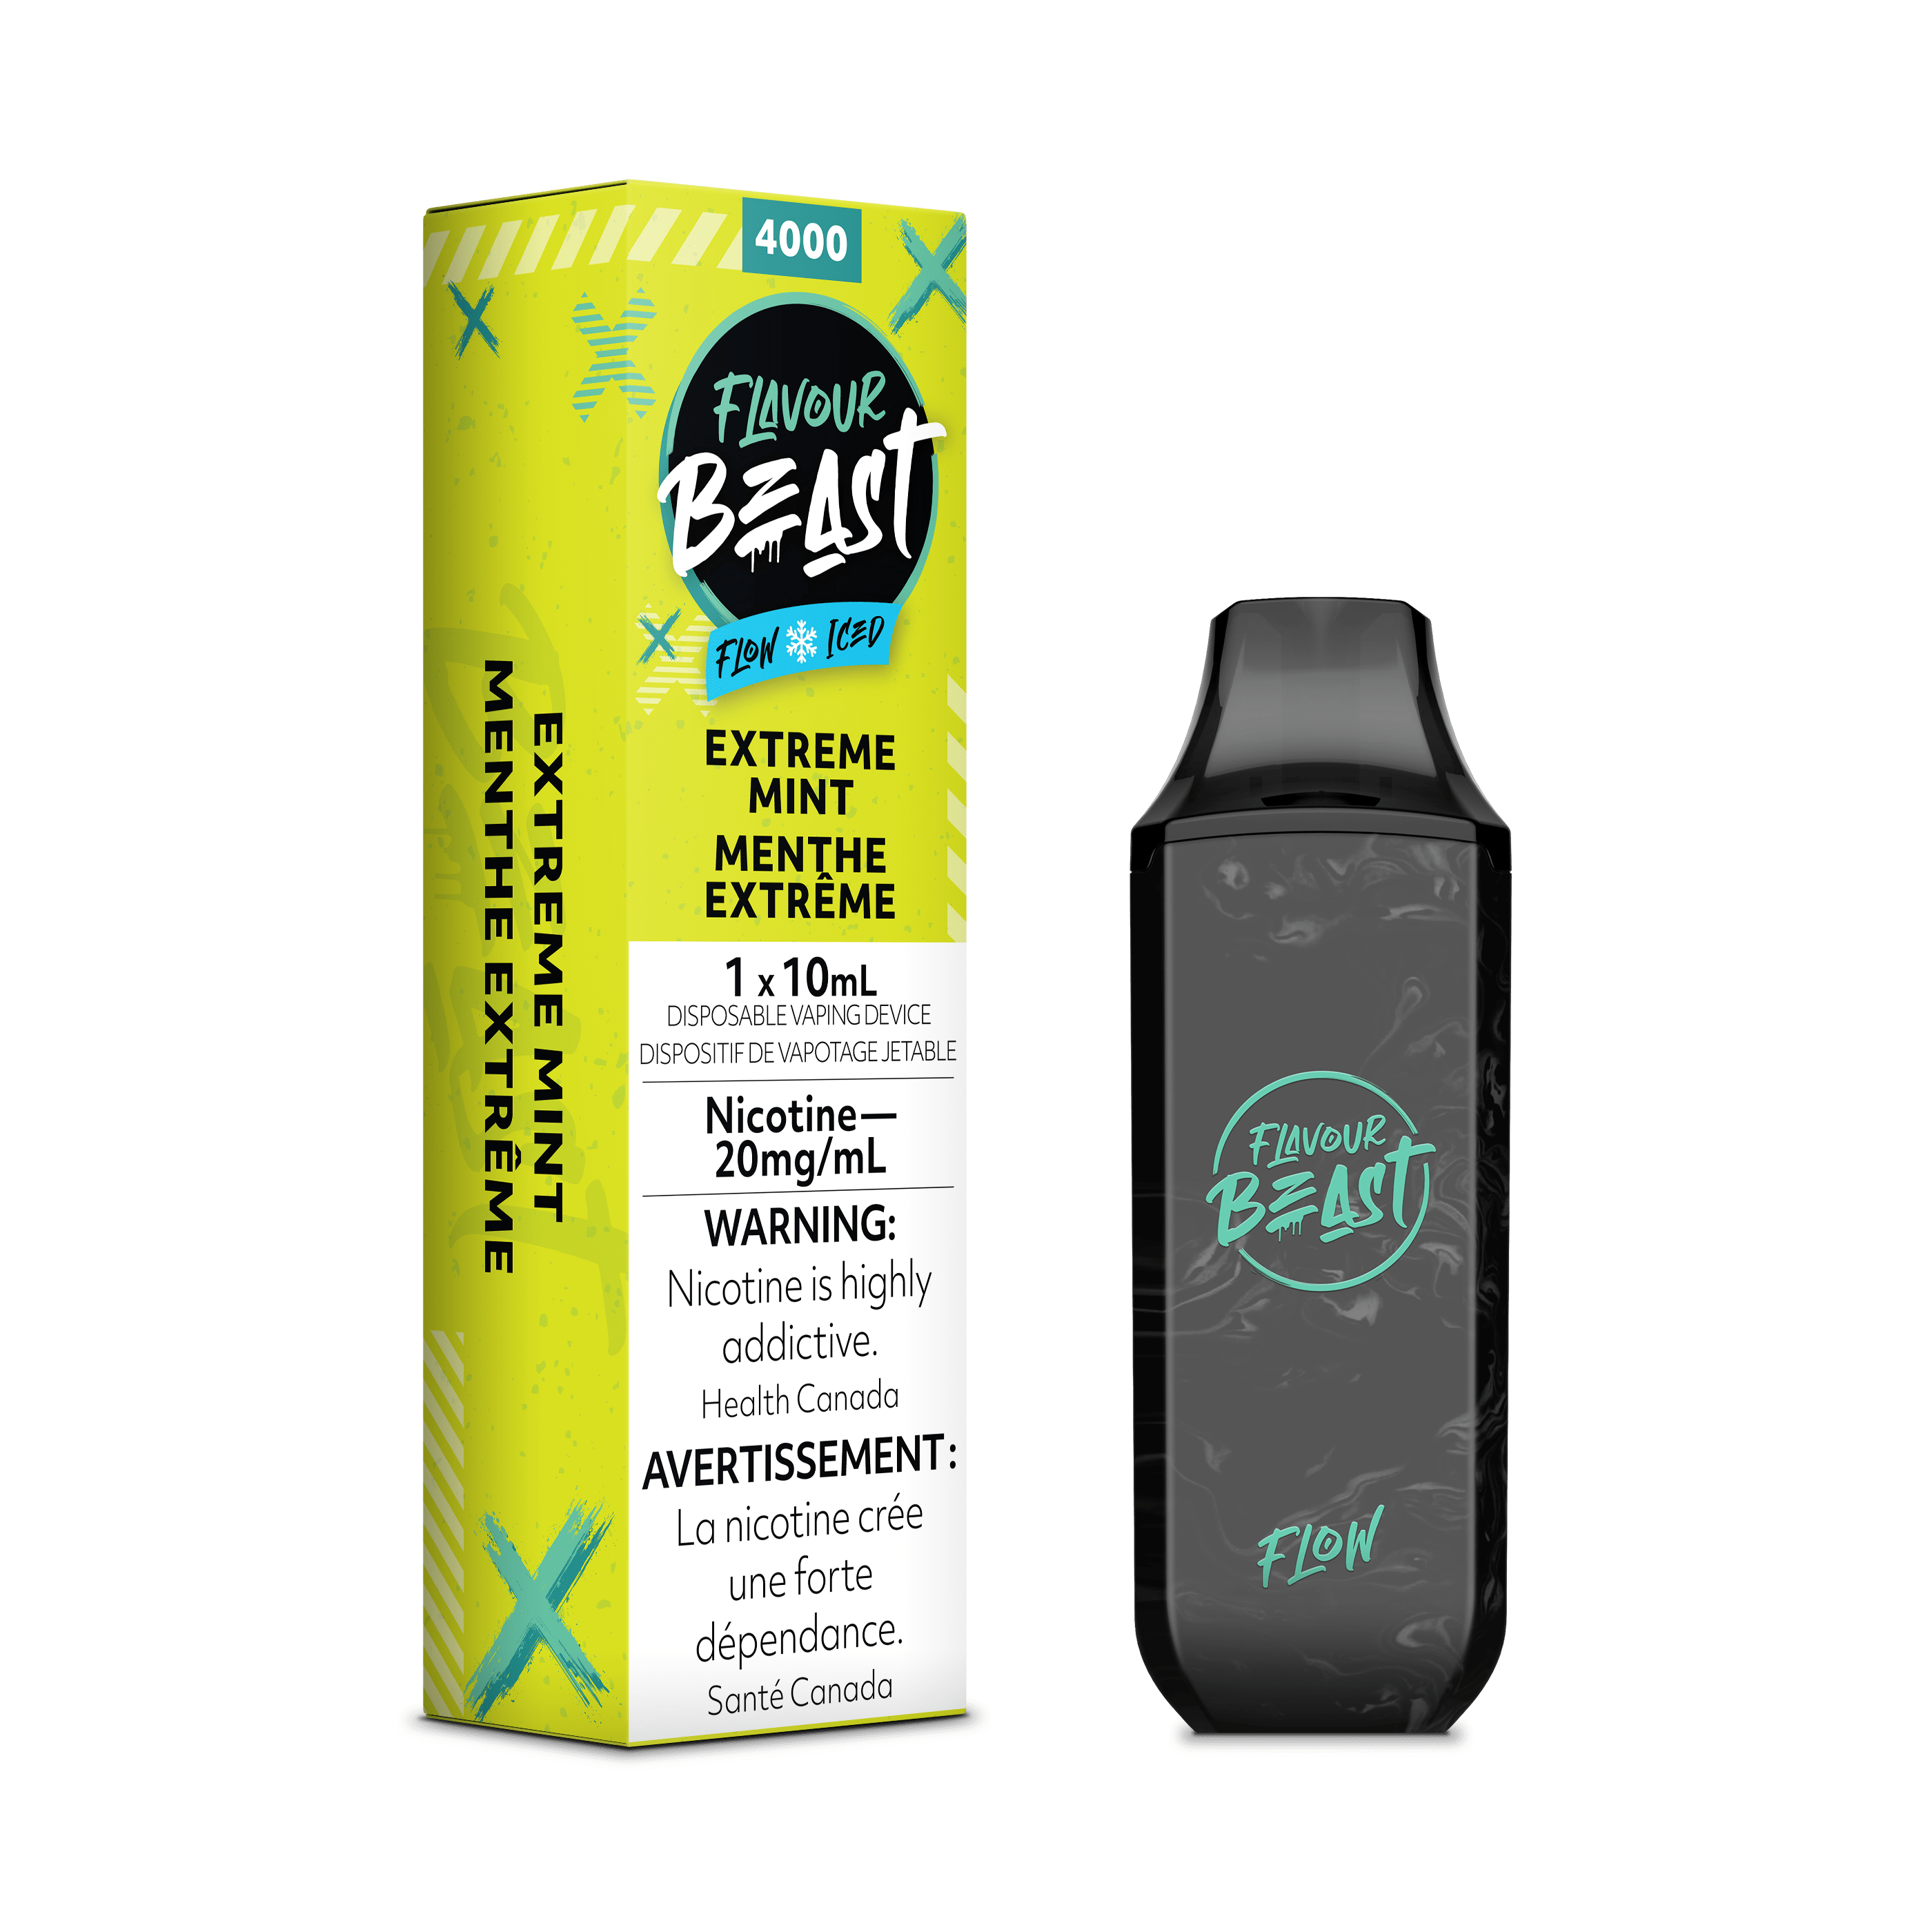 Flavour Beast Flow Disposable Vape - Extreme Mint Iced available on Canada online vape shop